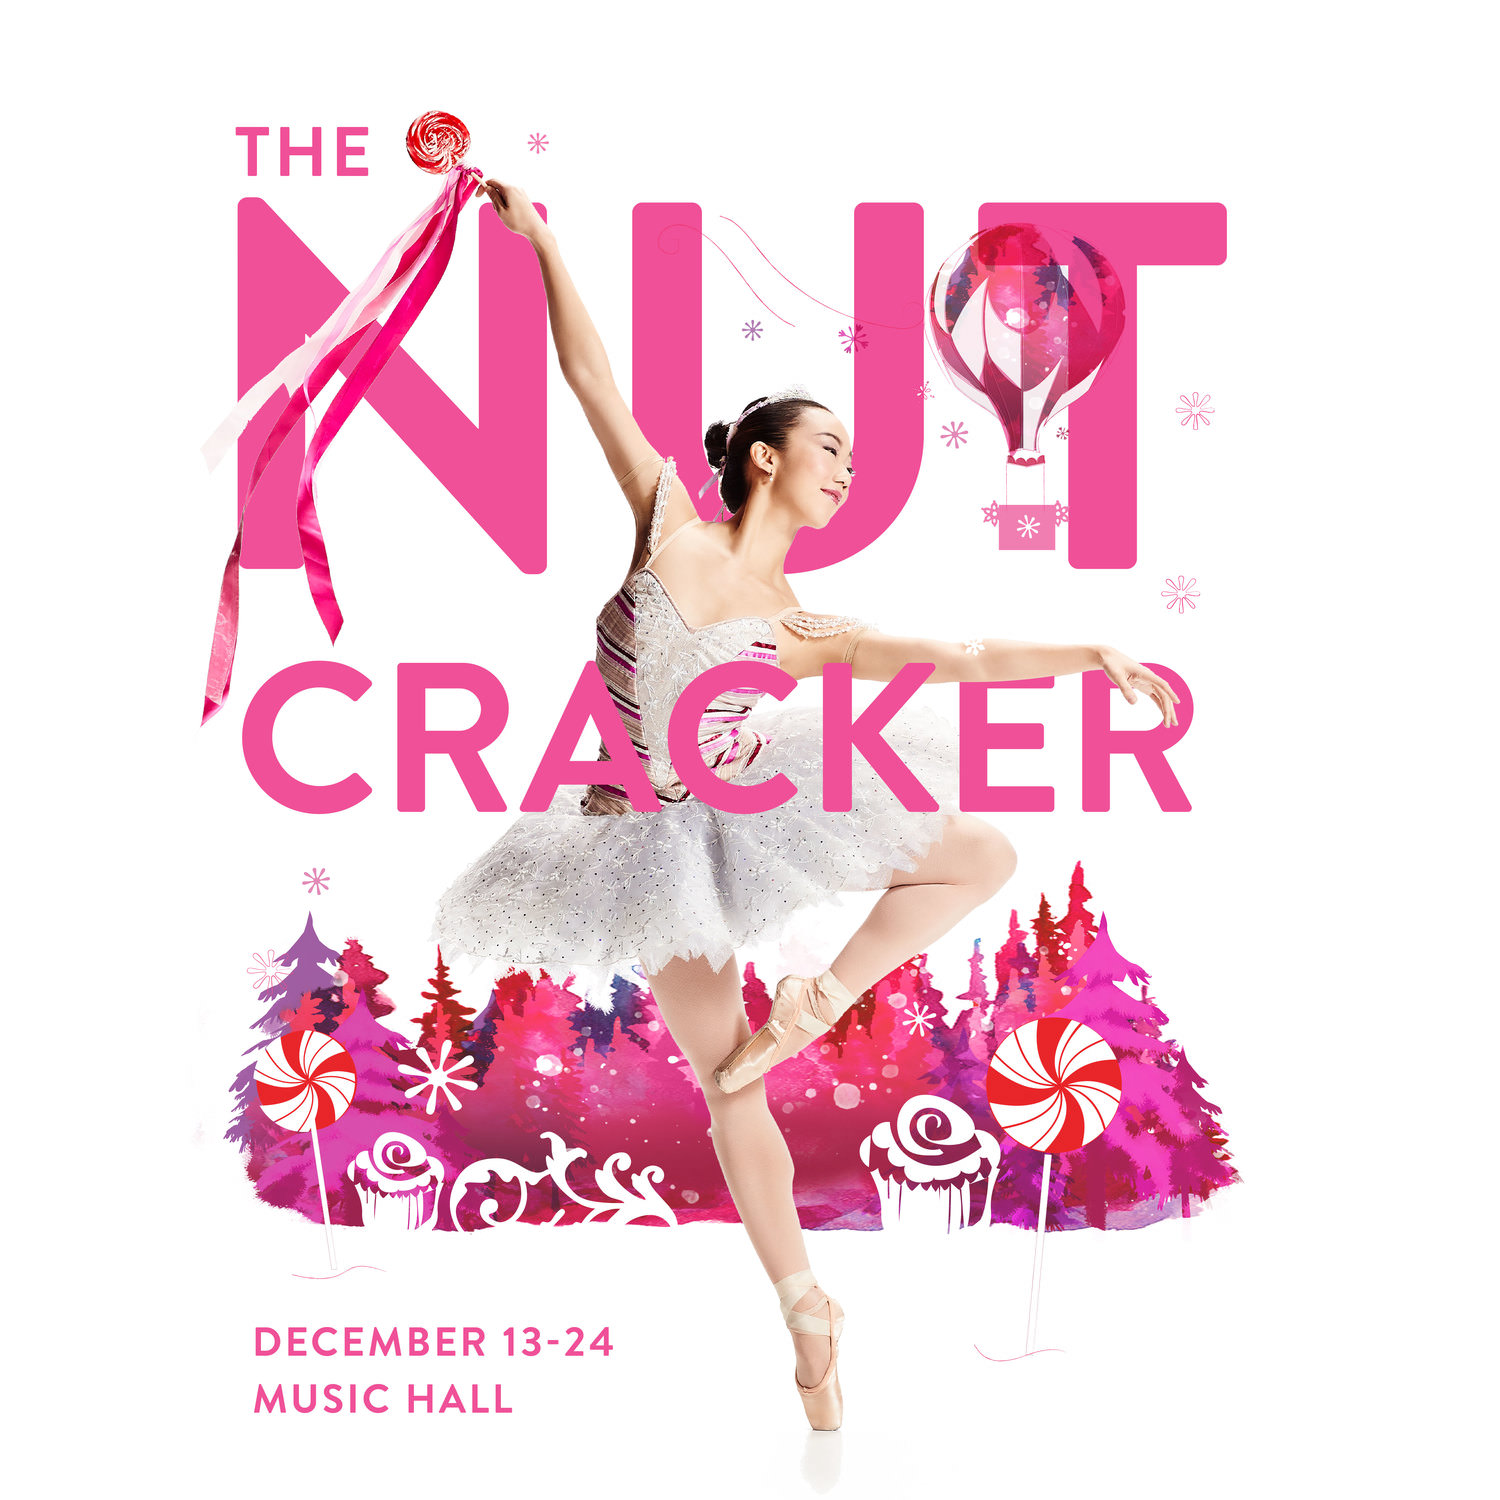 Cincinnati’s favorite holiday tradition is back!
Cincinnati Ballet’s holiday triumph returns once again to Music Hall in all its splendor. Complete with eye-popping sets and costumes, and set to Tchaikovsky’s beloved score, The Nutcracker is the family tradition that can’t be missed. Embark on a journey with Clara and her Nutcracker Prince, and follow the Snow Queen and her King to the Land of Sweets, where the Sugar Plum Fairy and Cavalier are waiting to embrace you with treats and exotic celebrations.